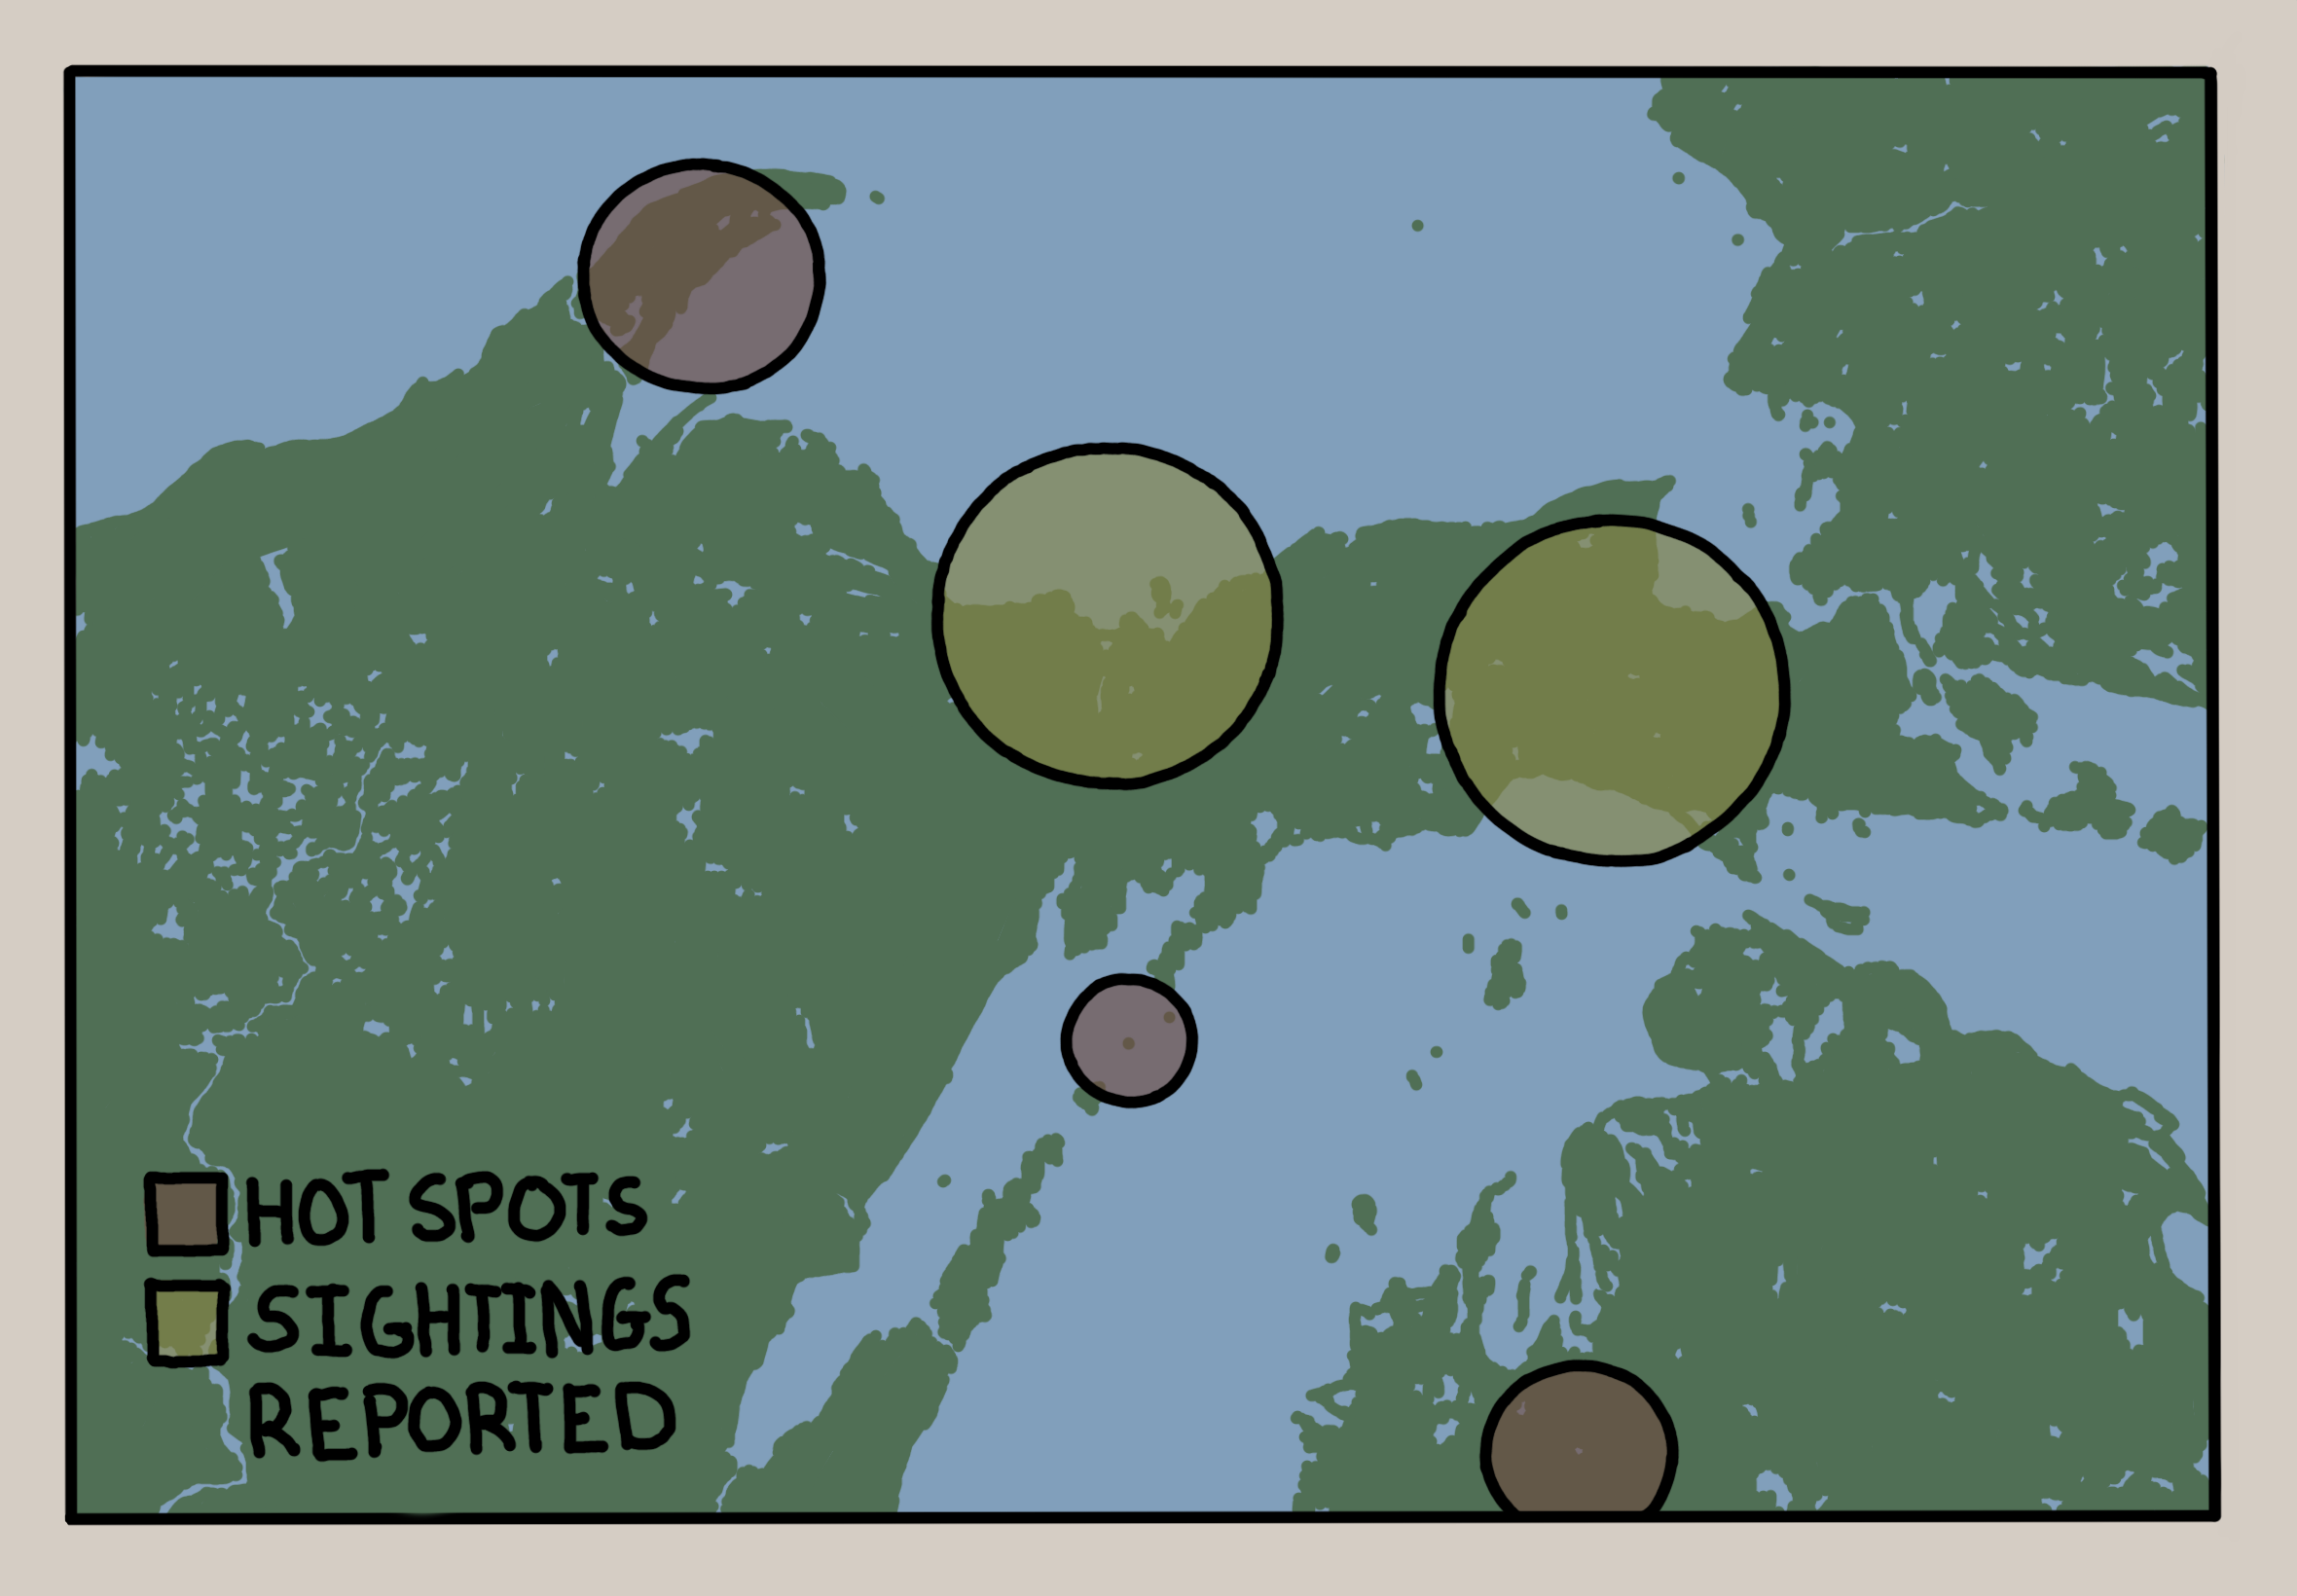 Poster used in the game UFO Chaser. A map of upper Michigan showing the recent UFO hot spots and sightings reported.